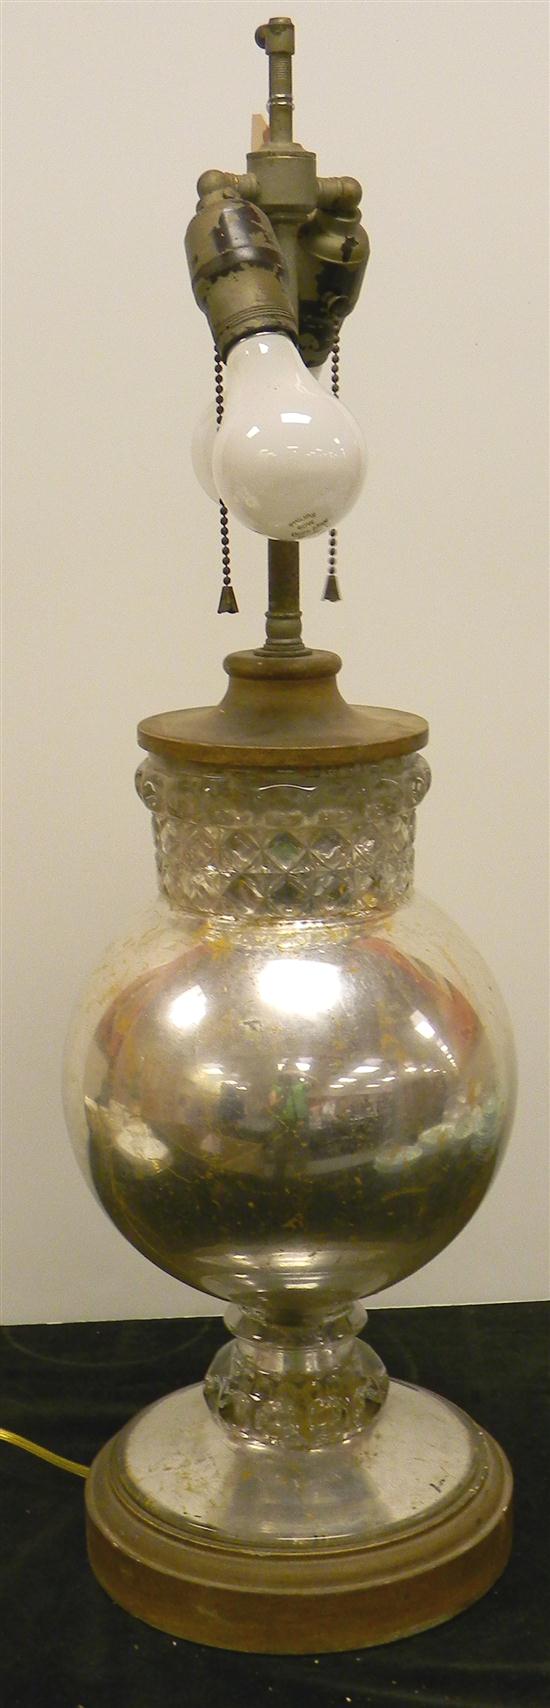 Mercury lined glass lamp with two 120c96